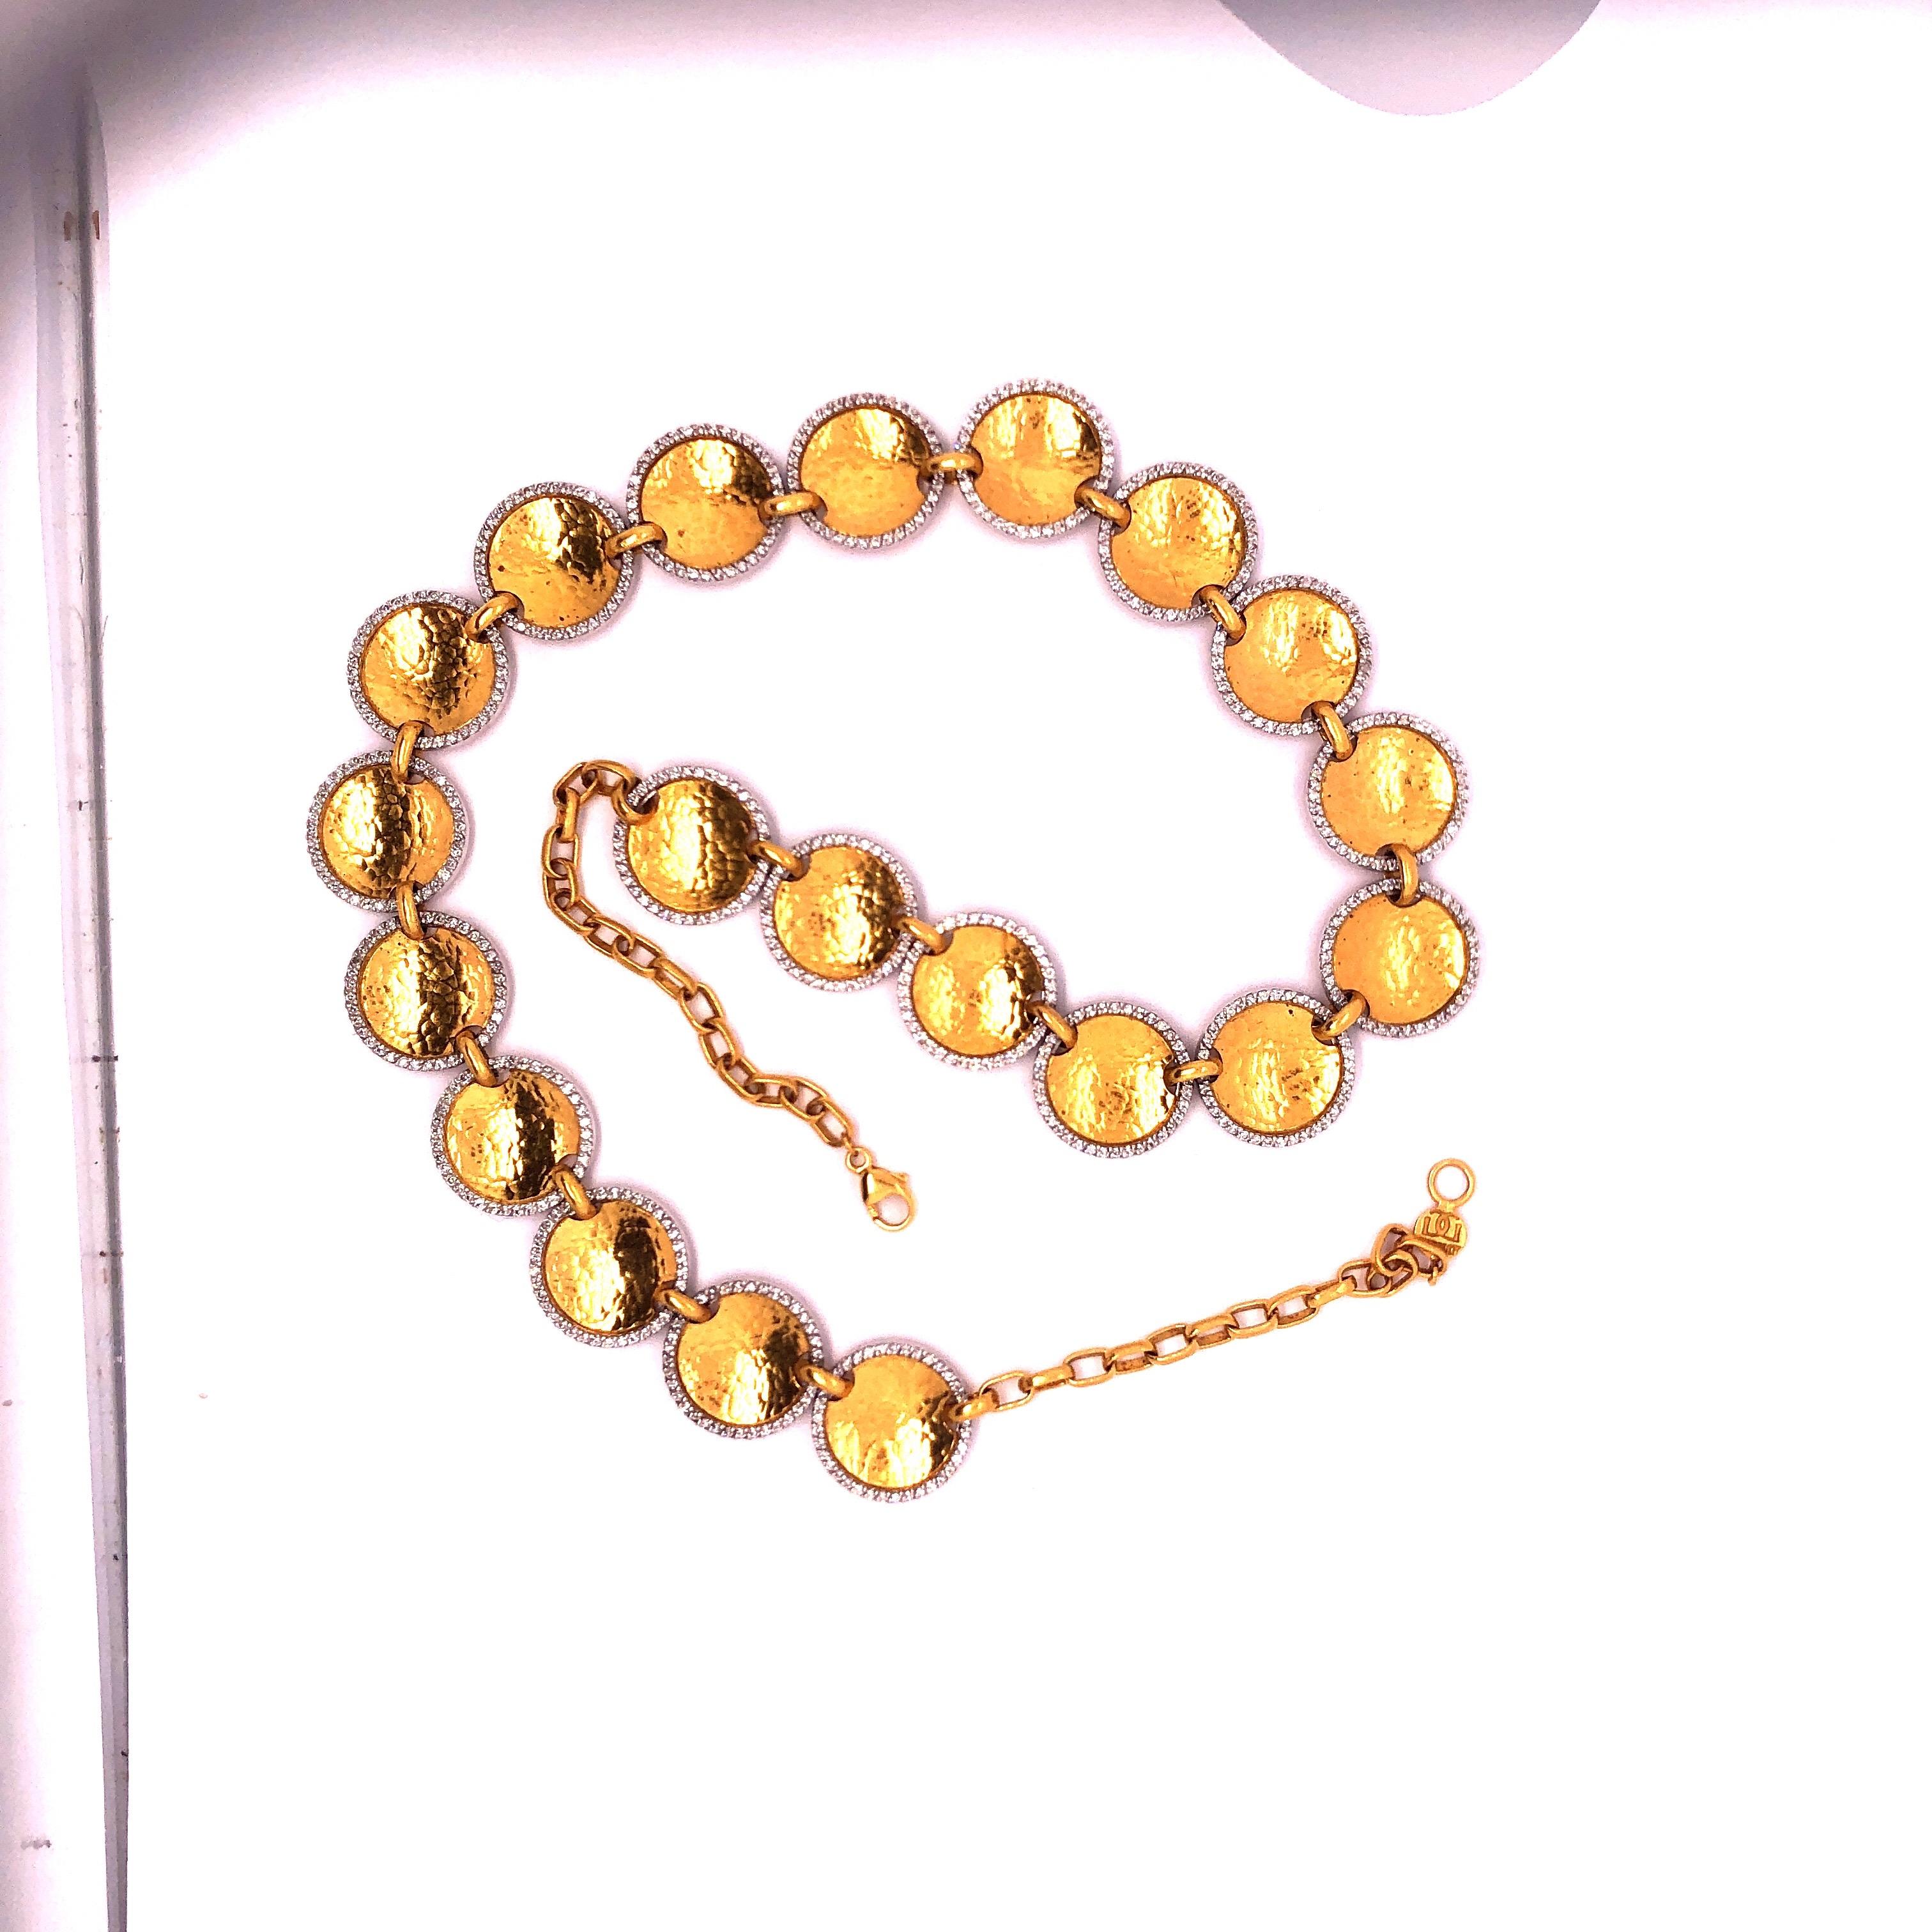 24K Yellow Gold and Diamond Necklace made by renowned designer Gurhan.  This preowned piece is absolutely stunning.  Stamped Gurhan. Gold is lightly hammered in classic Gurhan Style. 